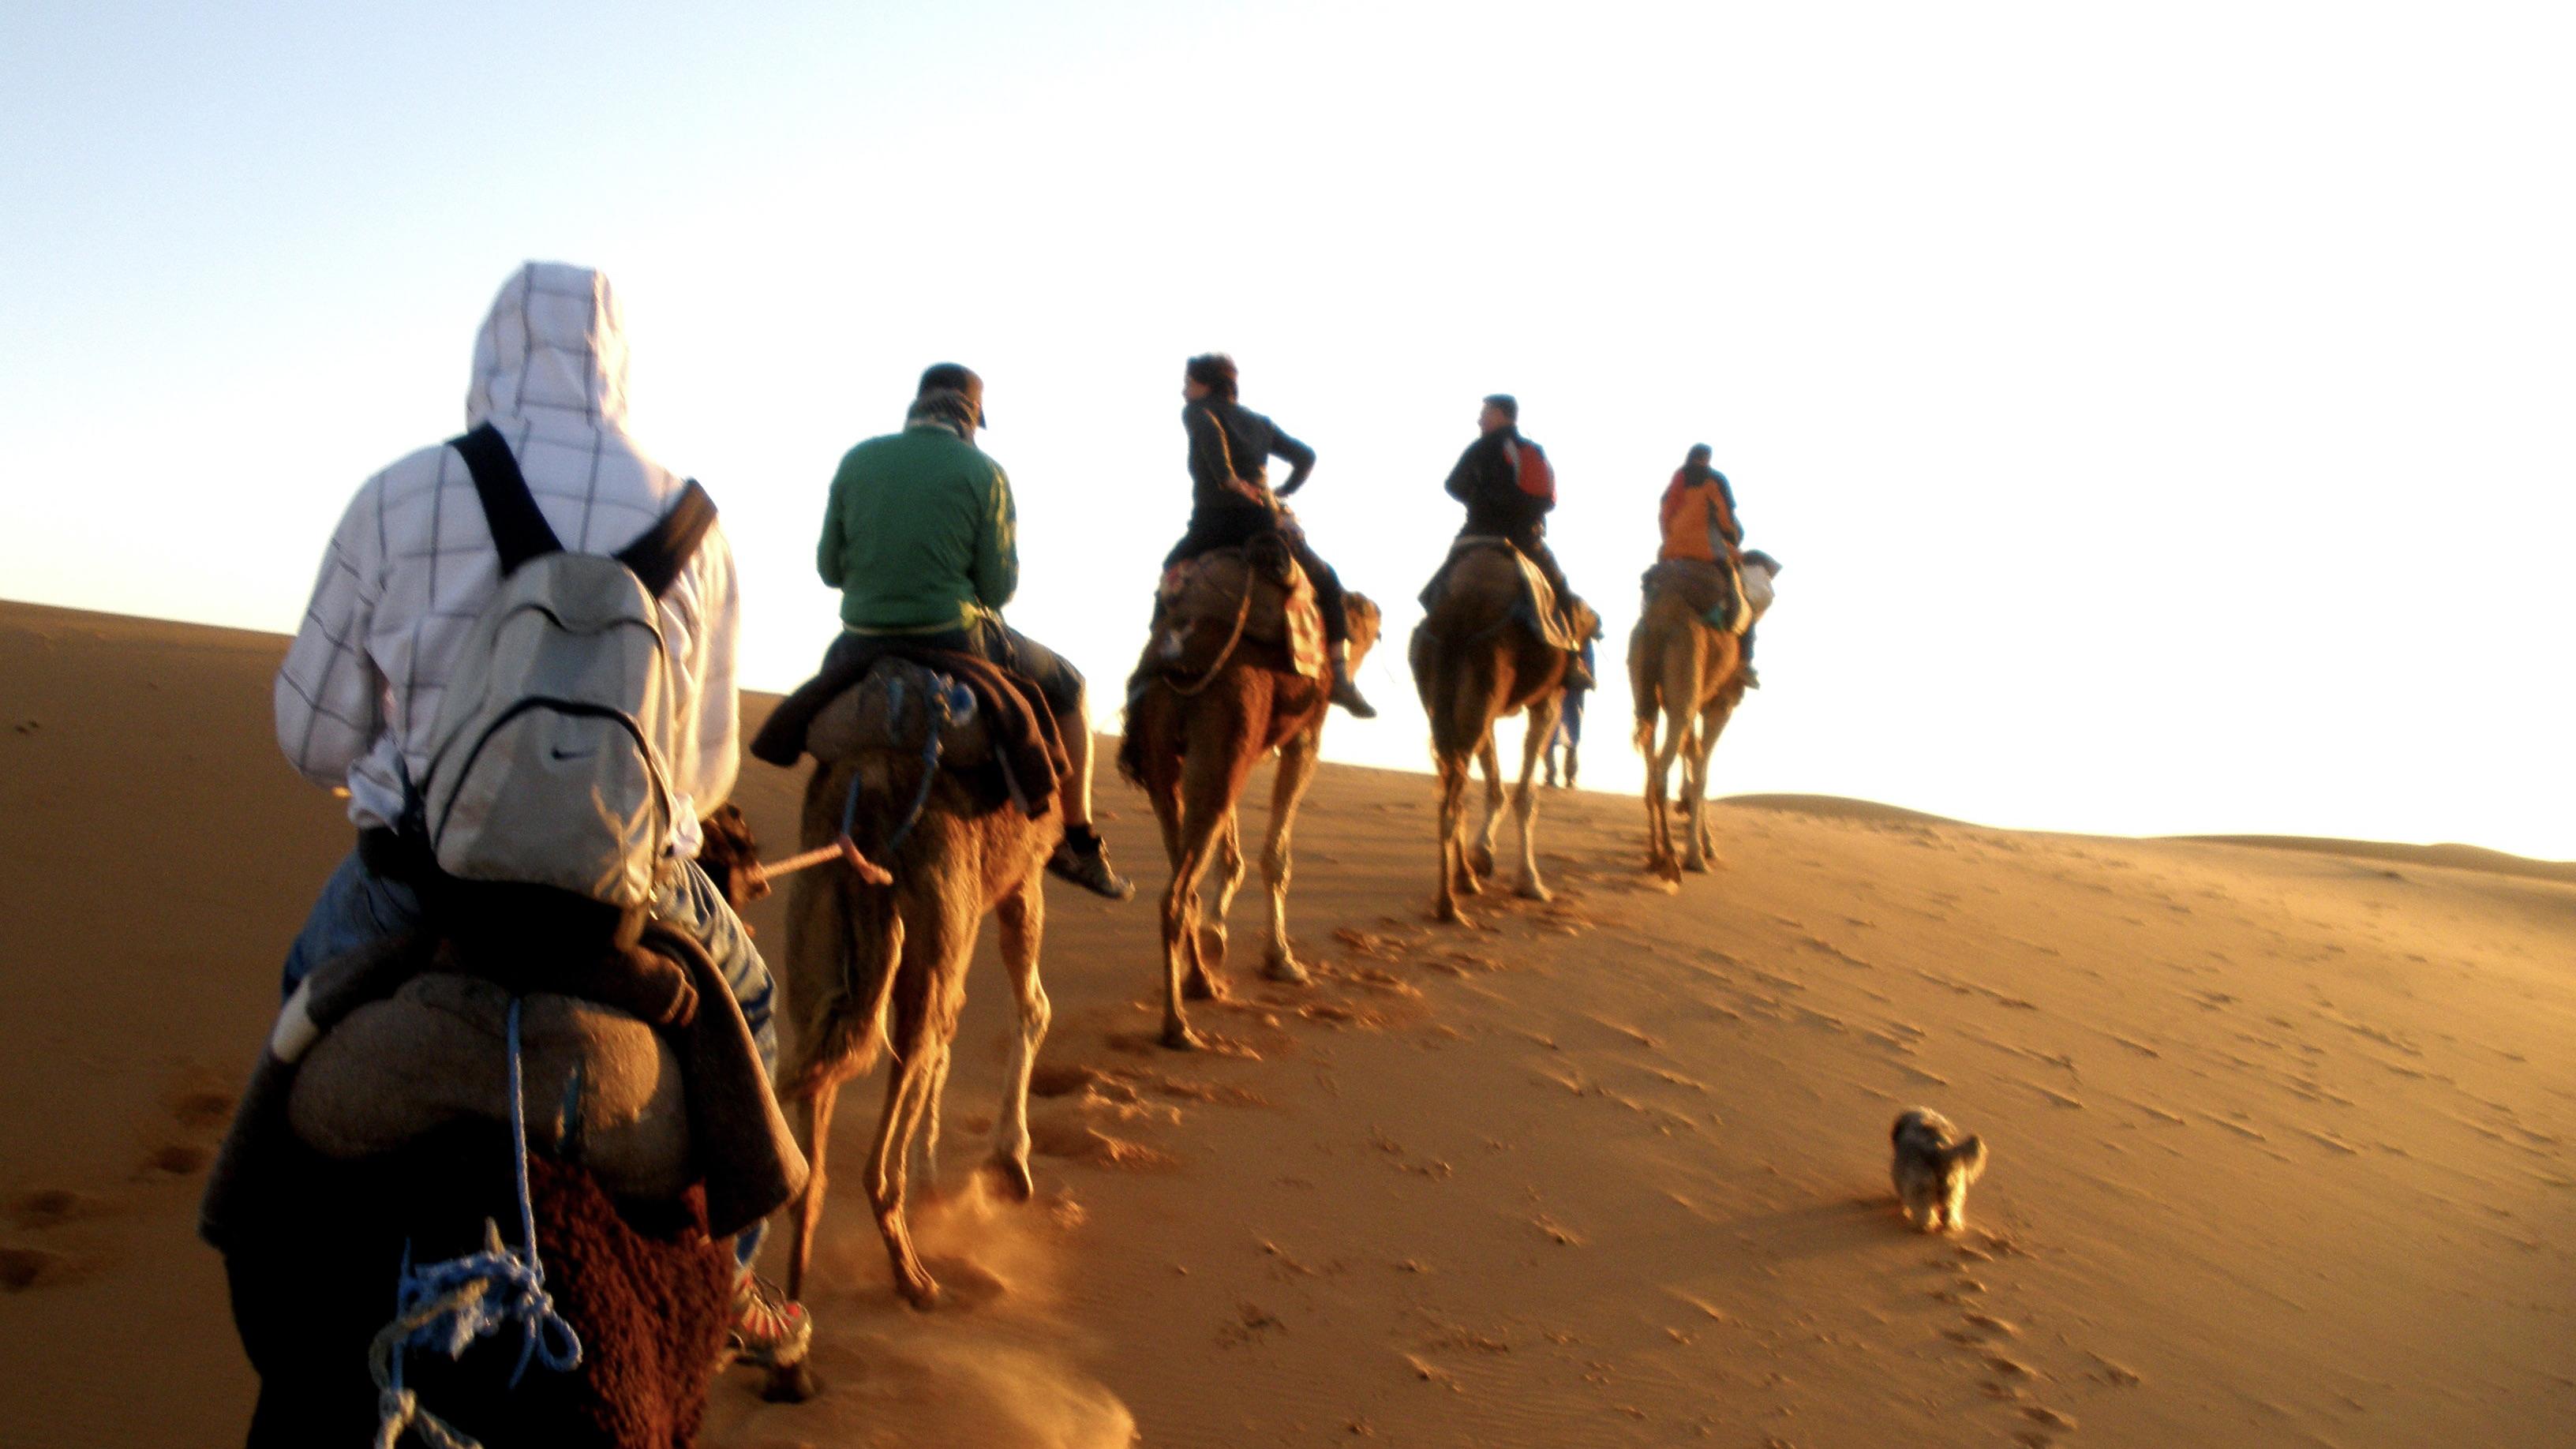 Students traverse the desert on camelback. Five camels and their riders align in the sand. 